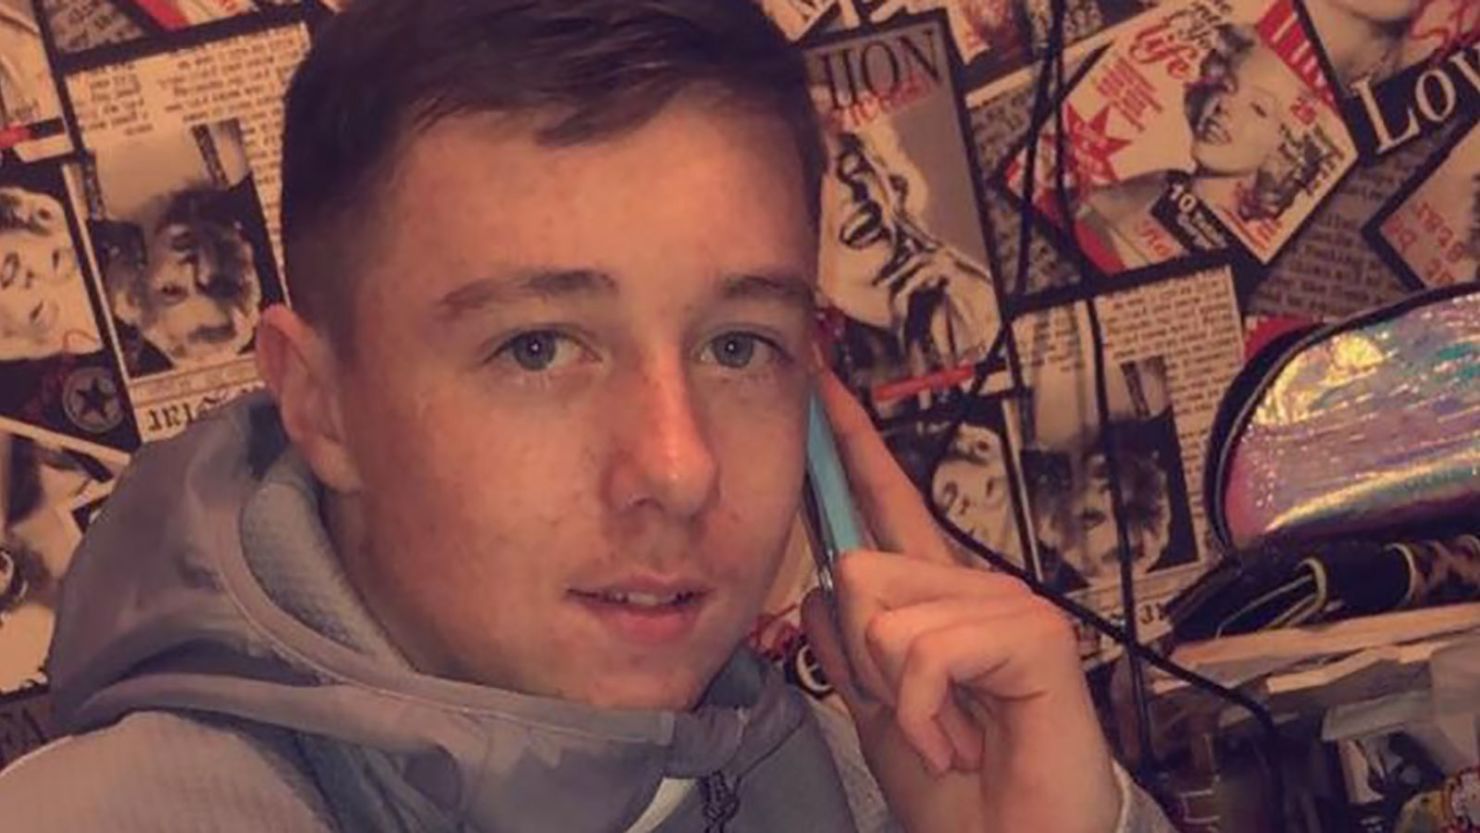 Keane Mulready-Woods was 17 when he was killed and dismembered earlier this month.